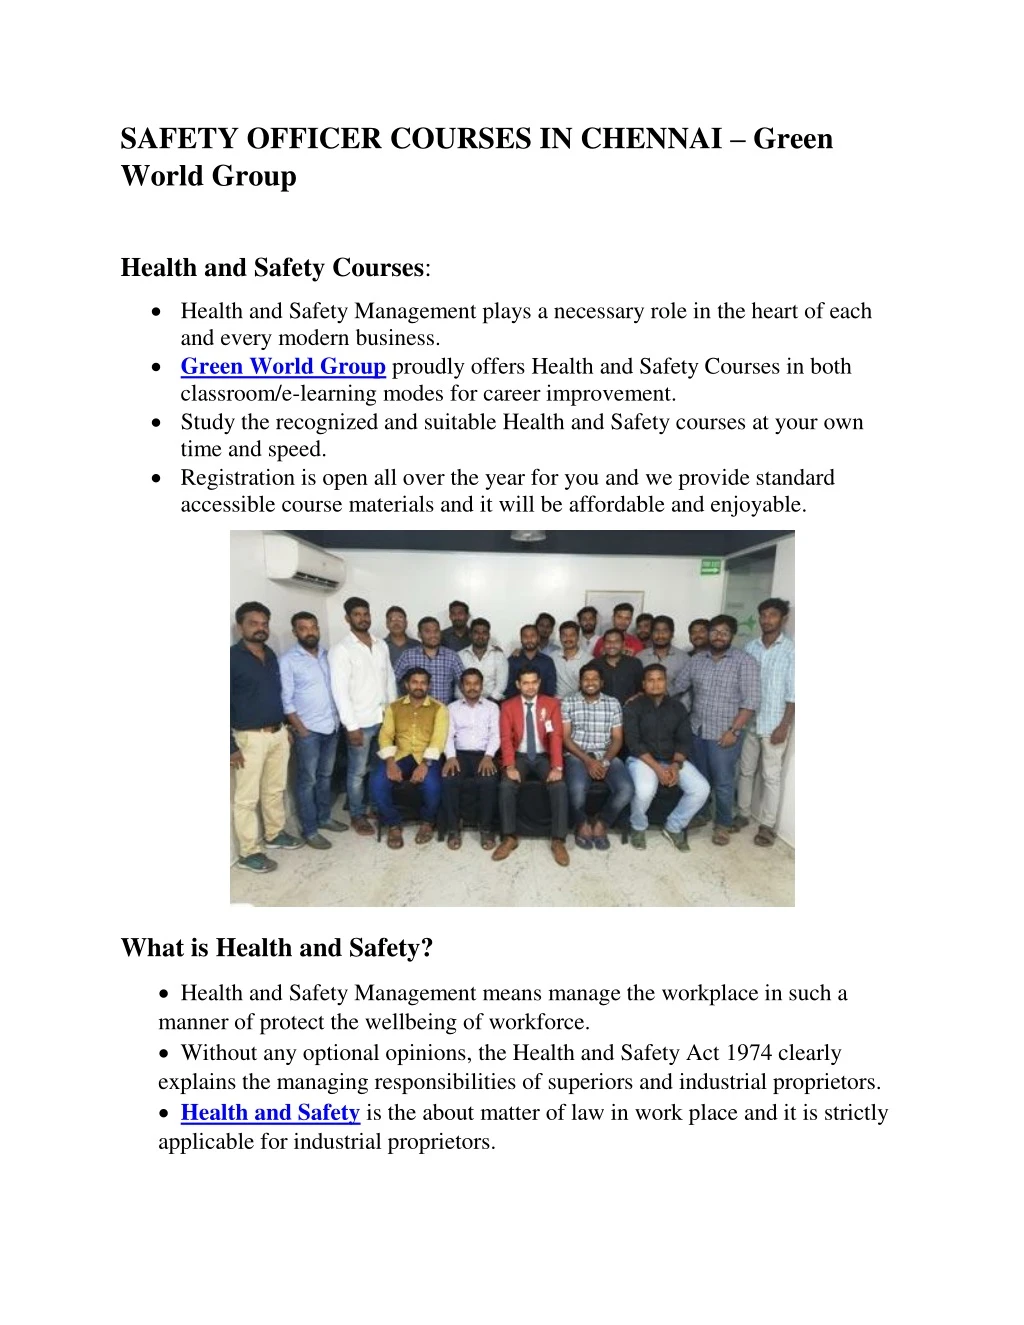 safety officer courses in chennai green world